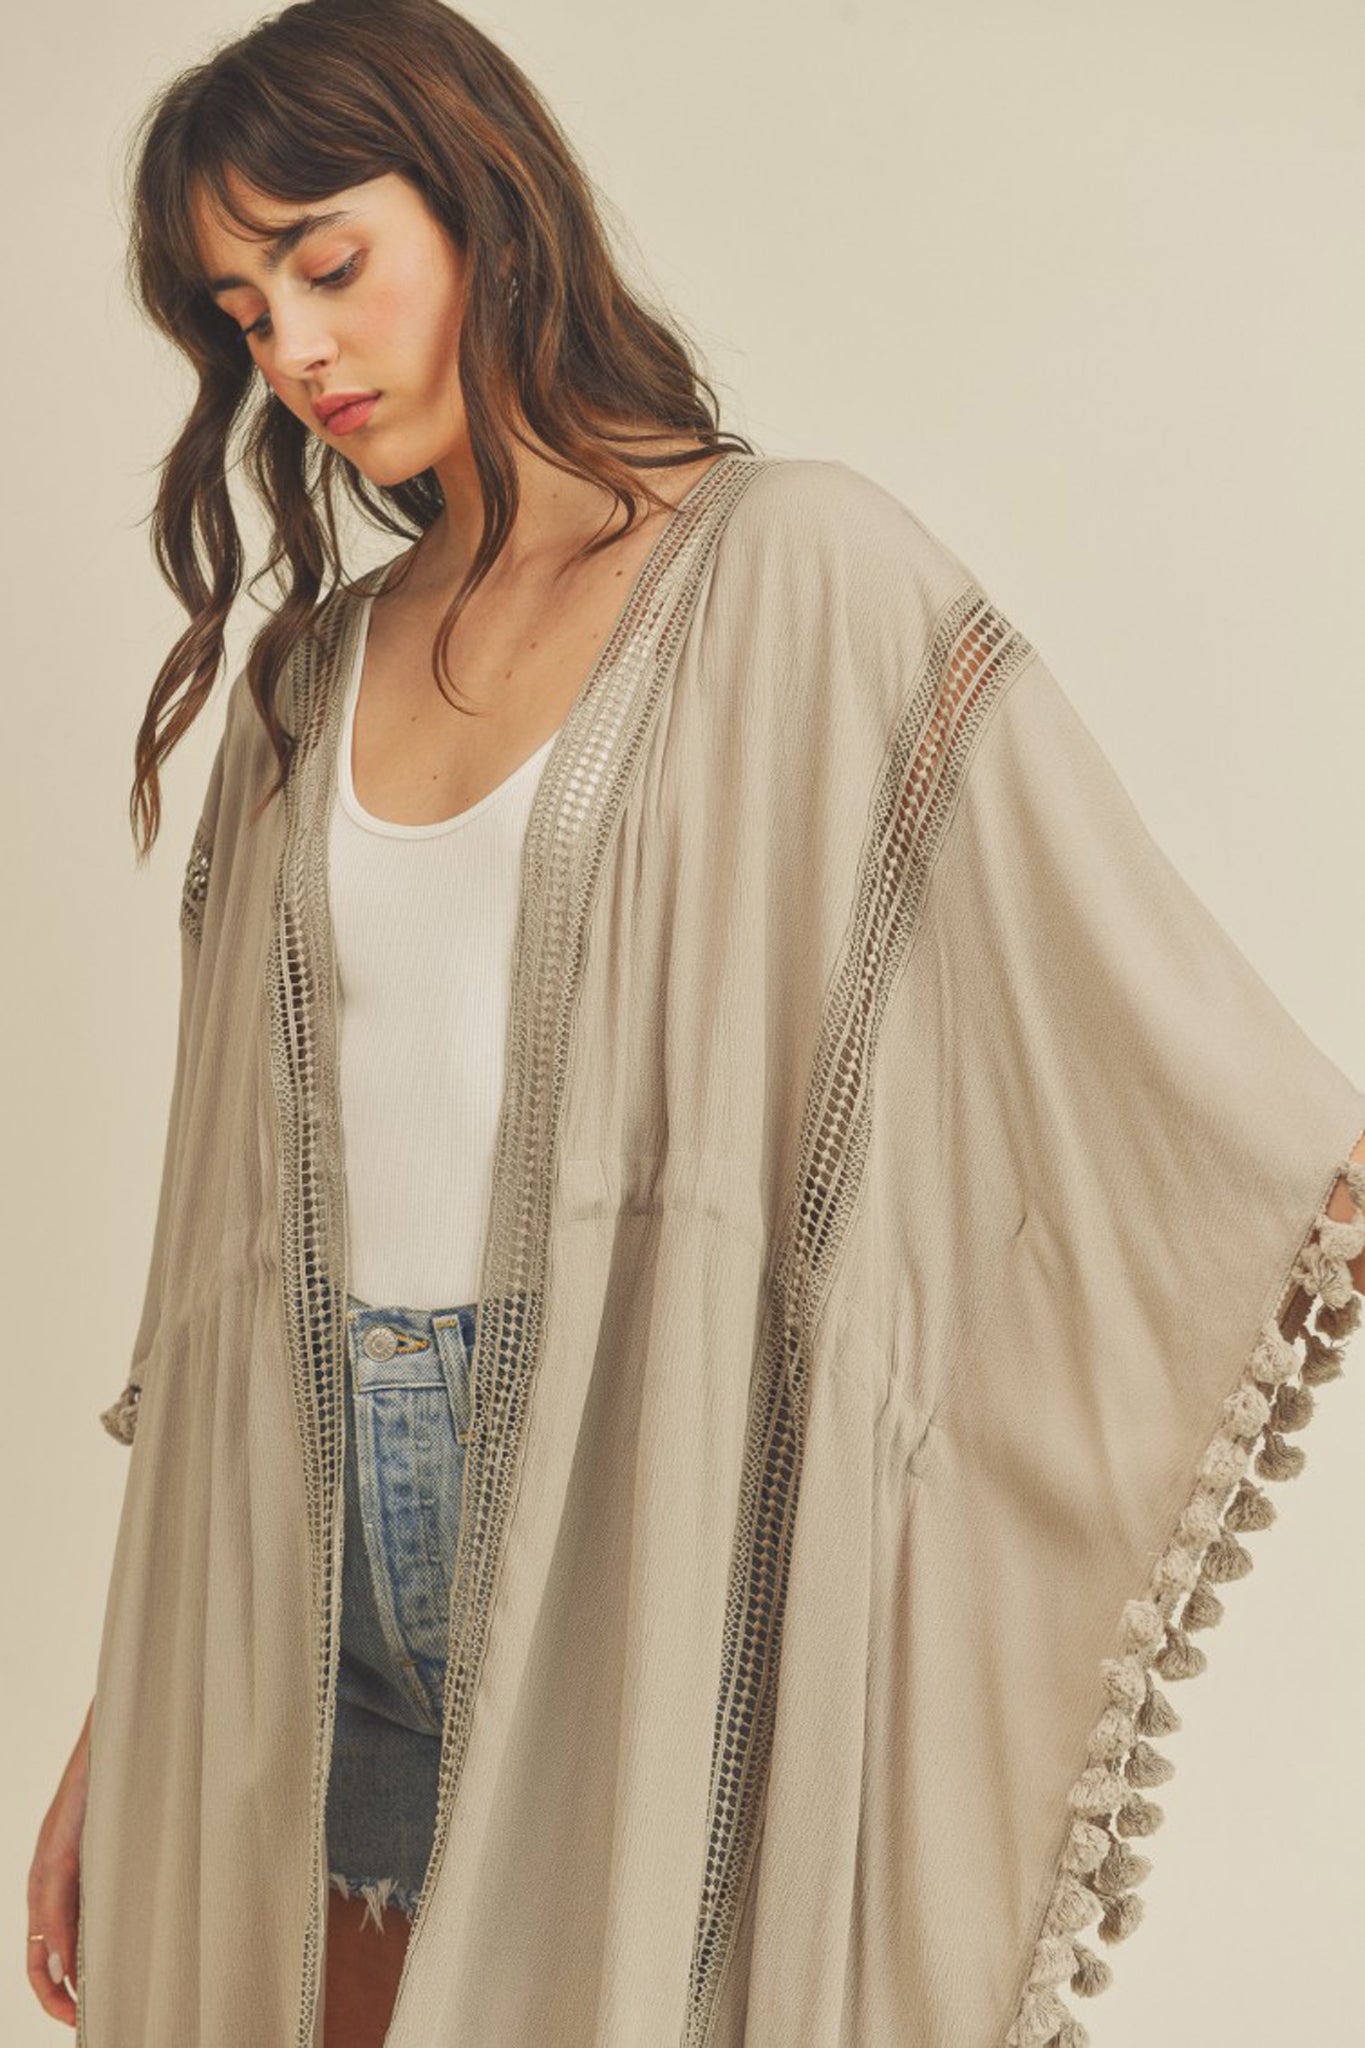 View 6 of Capistrano Tassel Fringe Duster, a Duster from Larrea Cove. Detail: .